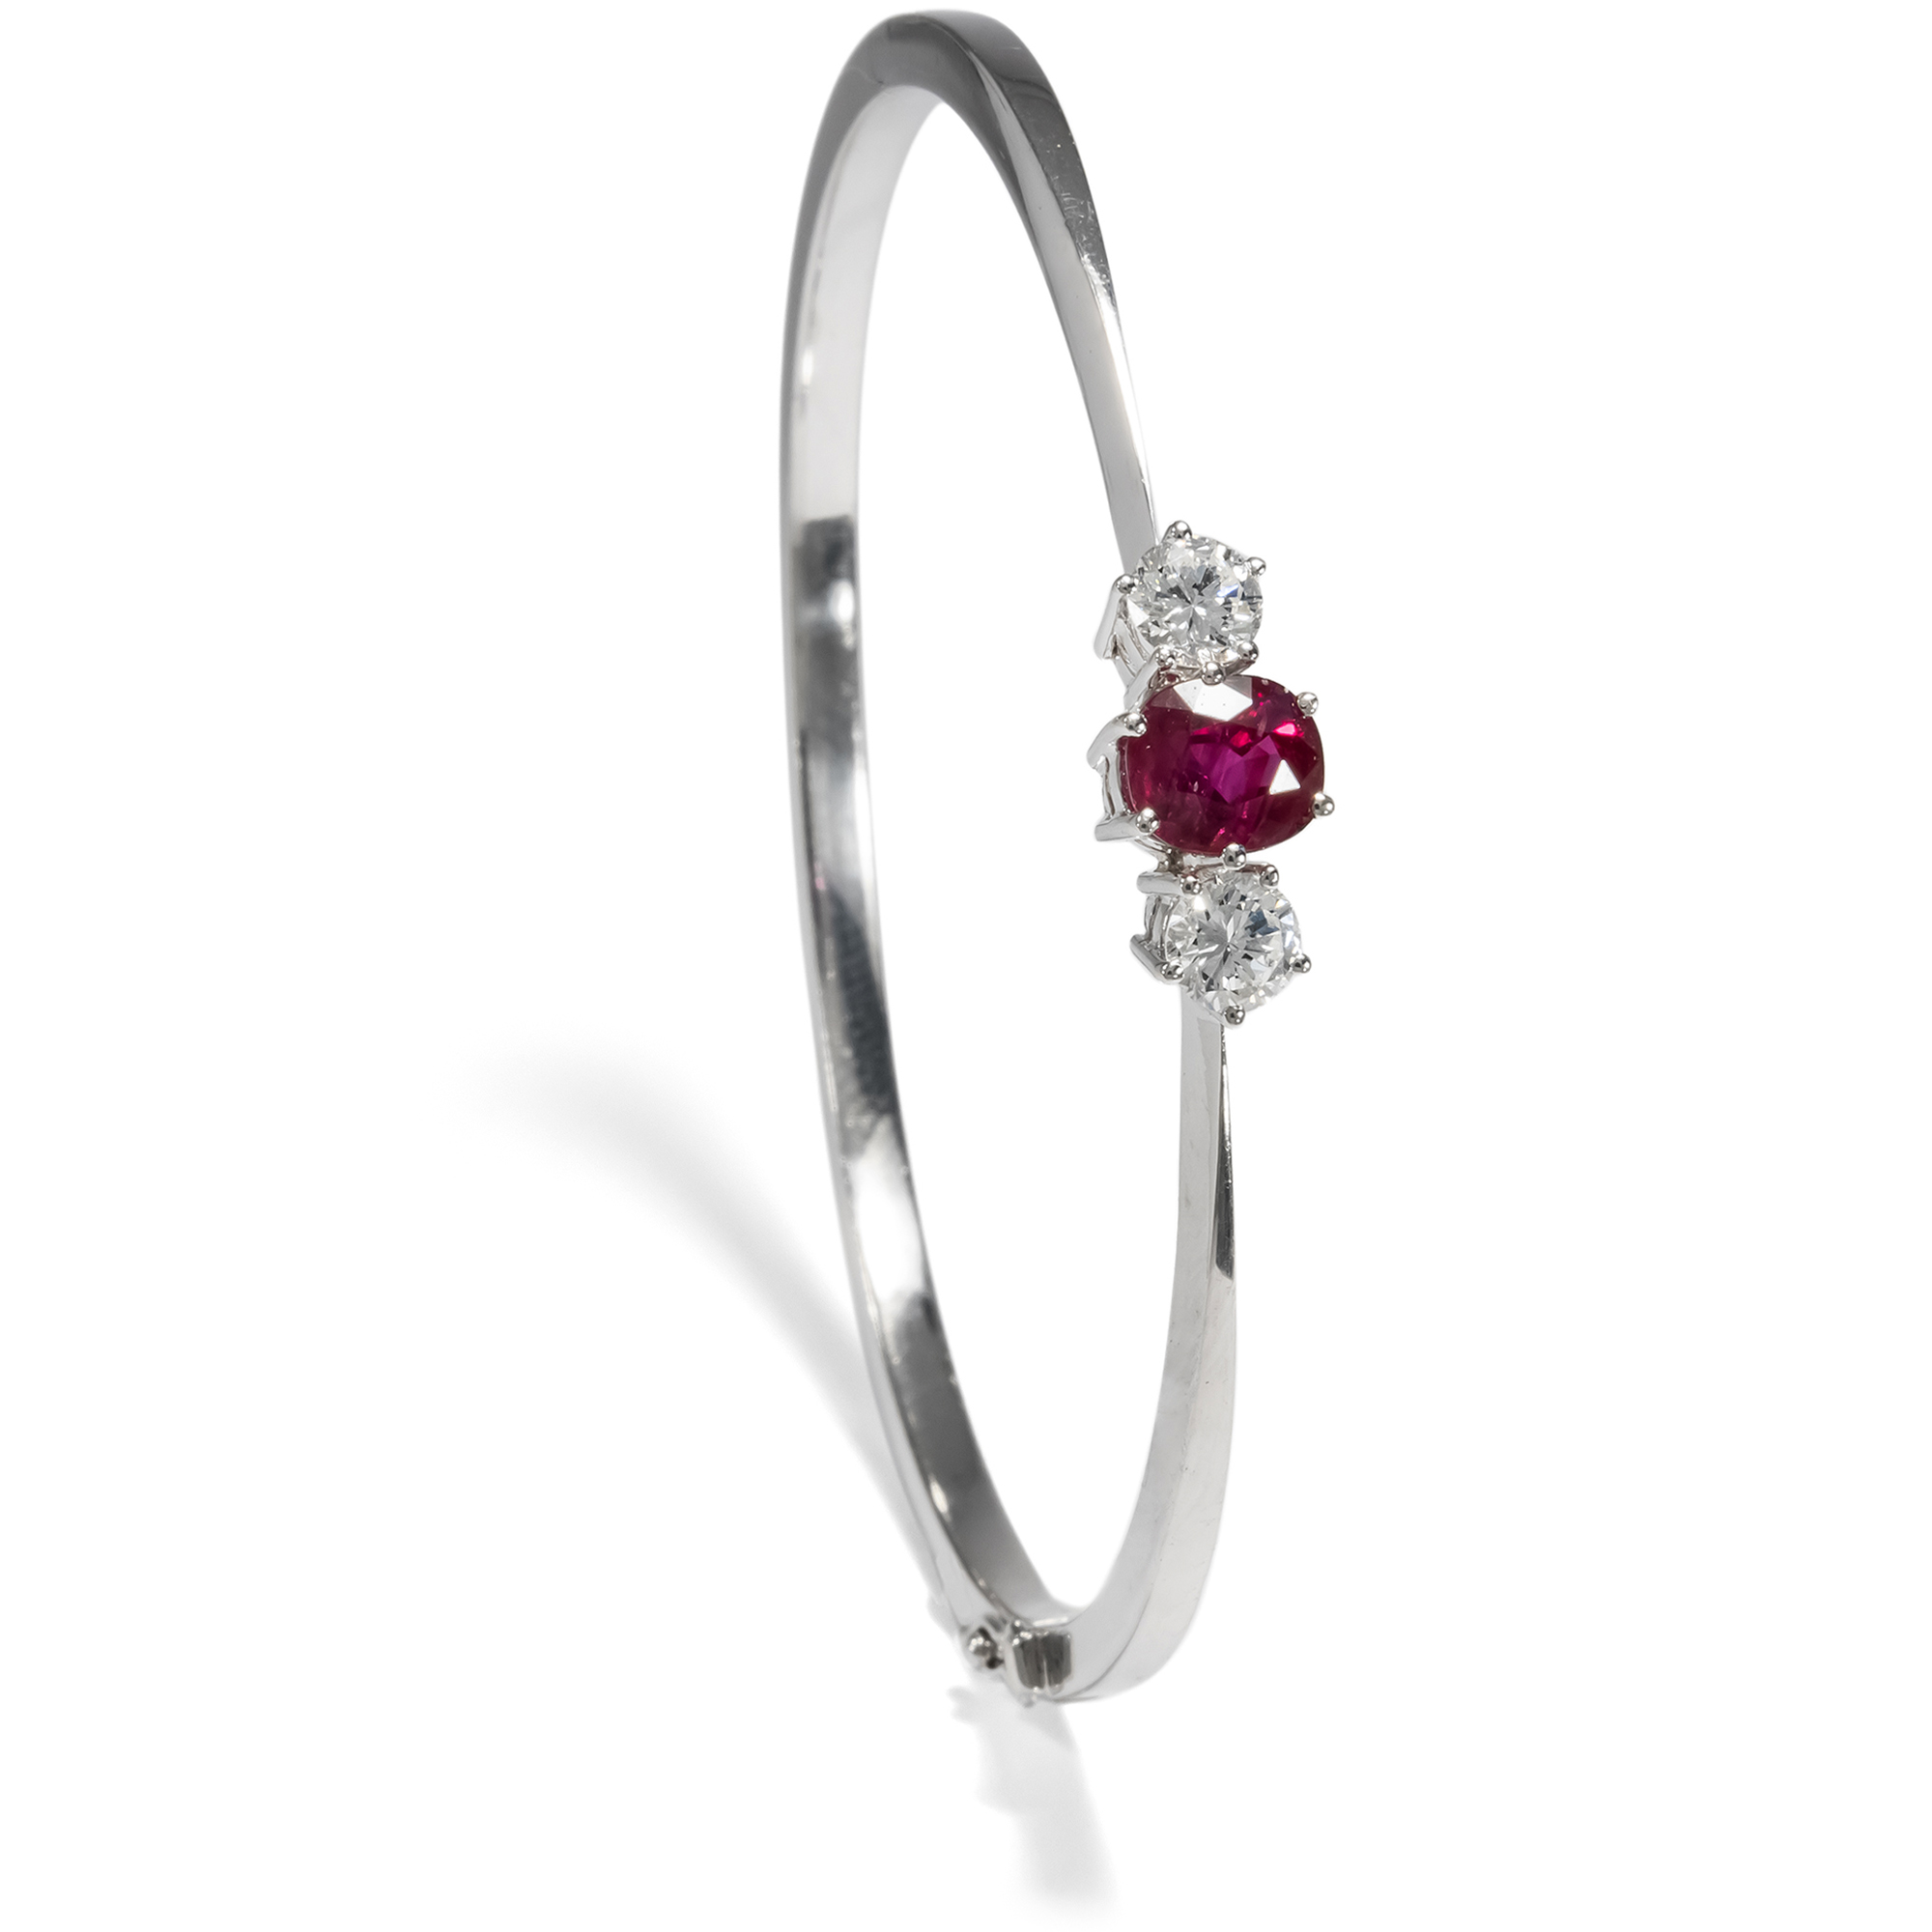 Exquisite Vintage Bangle with Ruby & Diamonds in White Gold, circa 1975